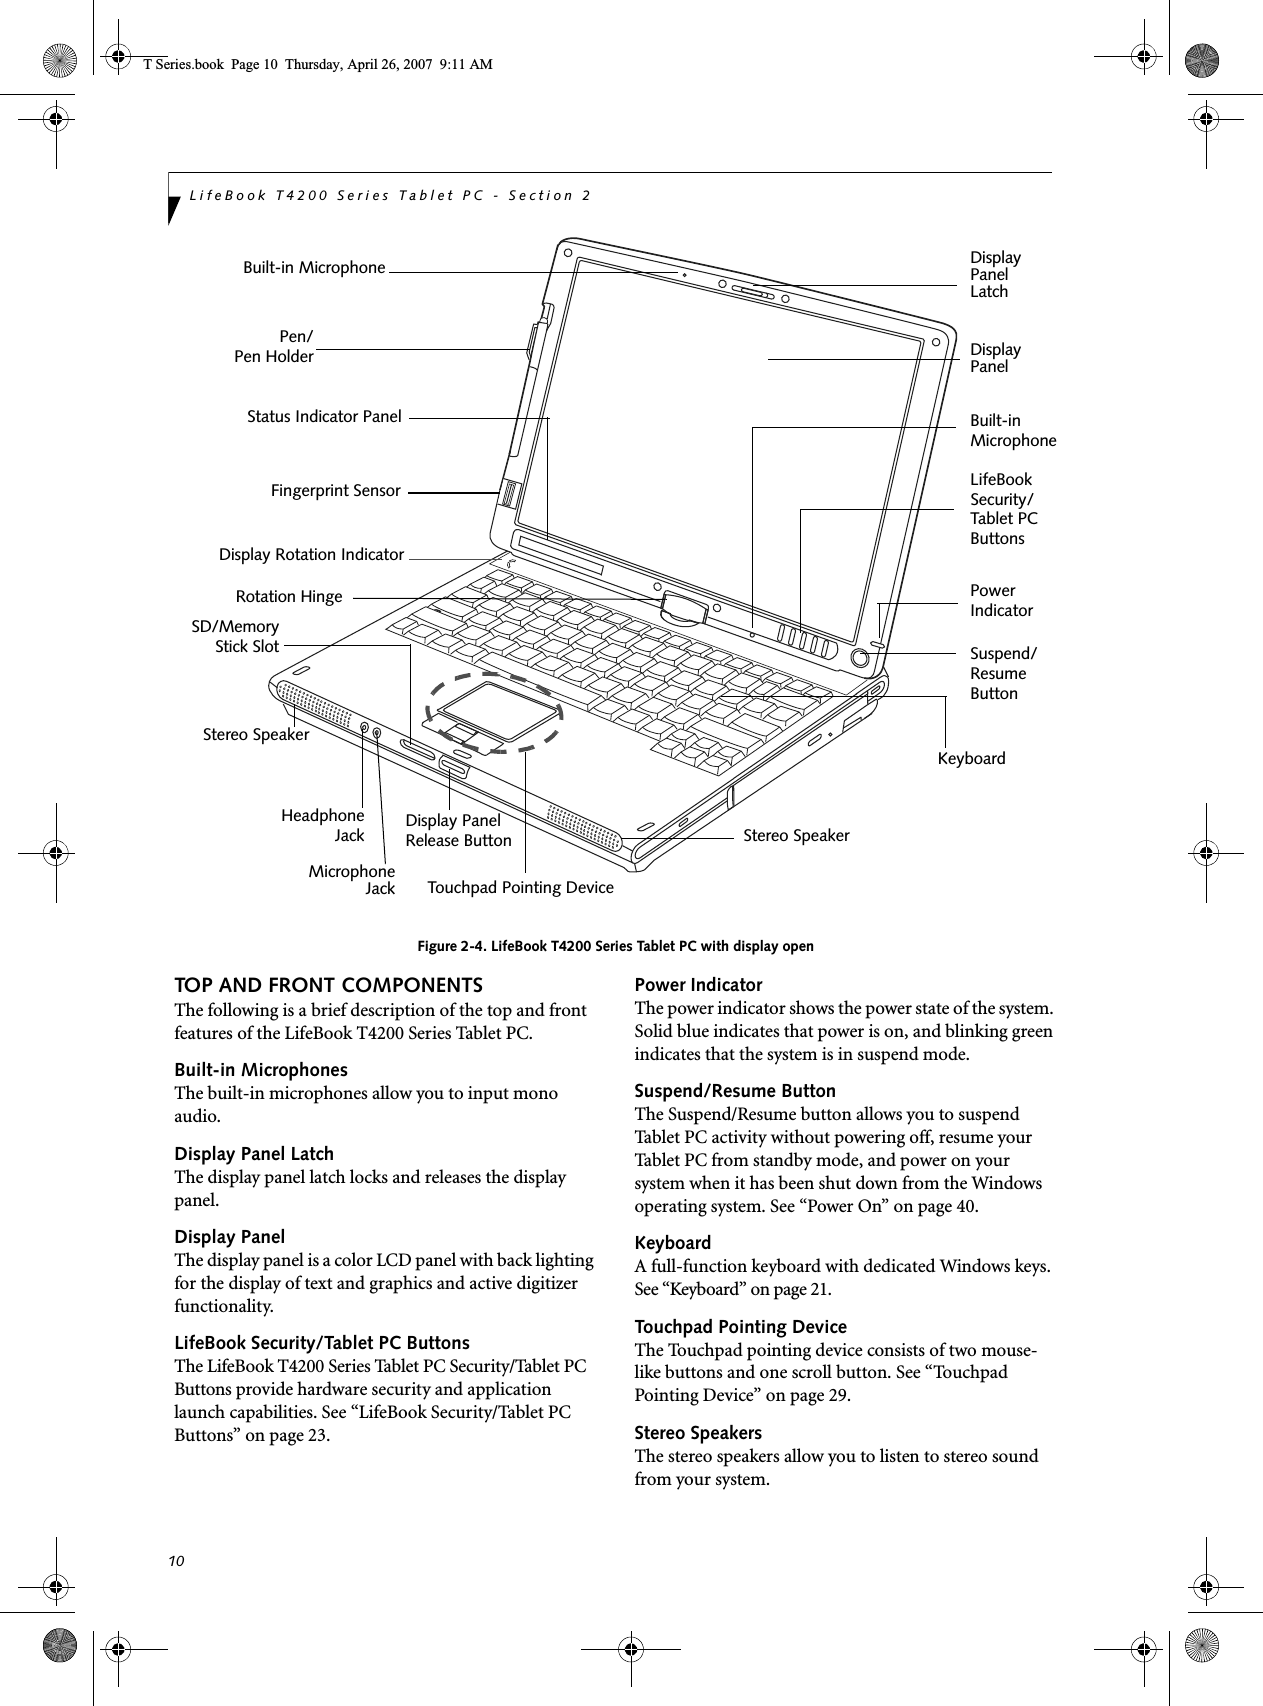 10LifeBook T4200 Series Tablet PC - Section 2Figure 2-4. LifeBook T4200 Series Tablet PC with display openTOP AND FRONT COMPONENTSThe following is a brief description of the top and front features of the LifeBook T4200 Series Tablet PC. Built-in MicrophonesThe built-in microphones allow you to input mono audio. Display Panel LatchThe display panel latch locks and releases the display panel.Display PanelThe display panel is a color LCD panel with back lighting for the display of text and graphics and active digitizer functionality. LifeBook Security/Tablet PC ButtonsThe LifeBook T4200 Series Tablet PC Security/Tablet PC Buttons provide hardware security and application launch capabilities. See “LifeBook Security/Tablet PC Buttons” on page 23.Power IndicatorThe power indicator shows the power state of the system. Solid blue indicates that power is on, and blinking green indicates that the system is in suspend mode.Suspend/Resume ButtonThe Suspend/Resume button allows you to suspend Tablet PC activity without powering off, resume your Tablet PC from standby mode, and power on your system when it has been shut down from the Windows operating system. See “Power On” on page 40.KeyboardA full-function keyboard with dedicated Windows keys. See “Keyboard” on page 21.Touchpad Pointing DeviceThe Touchpad pointing device consists of two mouse-like buttons and one scroll button. See “Touchpad Pointing Device” on page 29.Stereo SpeakersThe stereo speakers allow you to listen to stereo sound from your system.Display Status Indicator PanelKeyboardLifeBook Touchpad Pointing DevicePanelDisplay PanelLatchRotation HingeSecurity/Stereo SpeakerPen/Pen HolderTablet PCButtonsStereo SpeakerHeadphoneMicrophoneJackJackSD/MemoryStick SlotSuspend/ResumeButtonBuilt-inMicrophonePowerIndicatorBuilt-in MicrophoneDisplay PanelRelease ButtonFingerprint SensorDisplay Rotation IndicatorT Series.book  Page 10  Thursday, April 26, 2007  9:11 AM